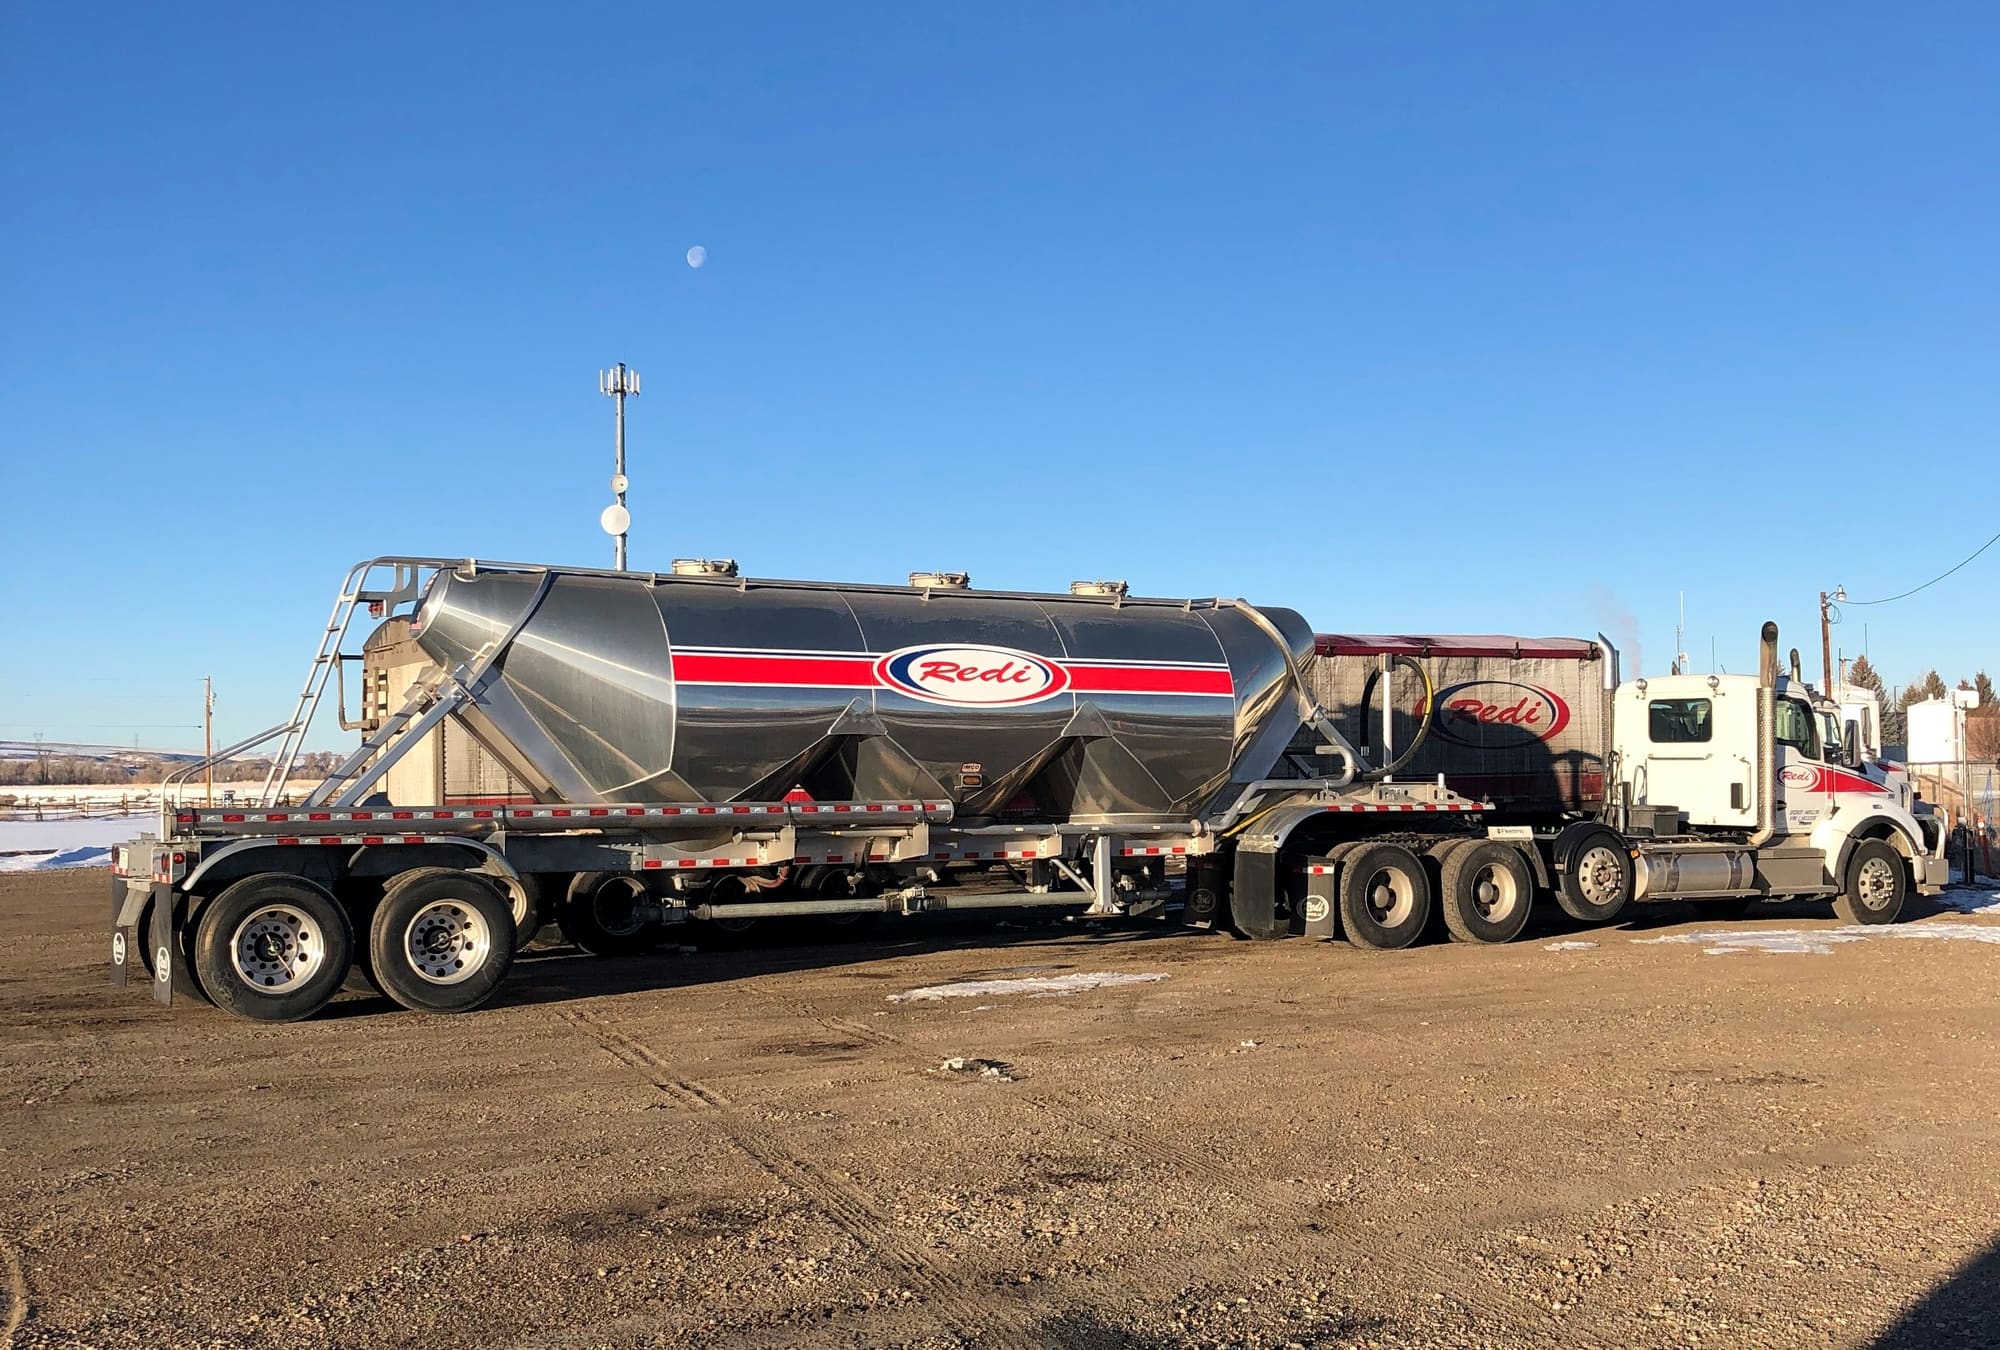 Redi Services expands trucking services into the pneumatic services arena